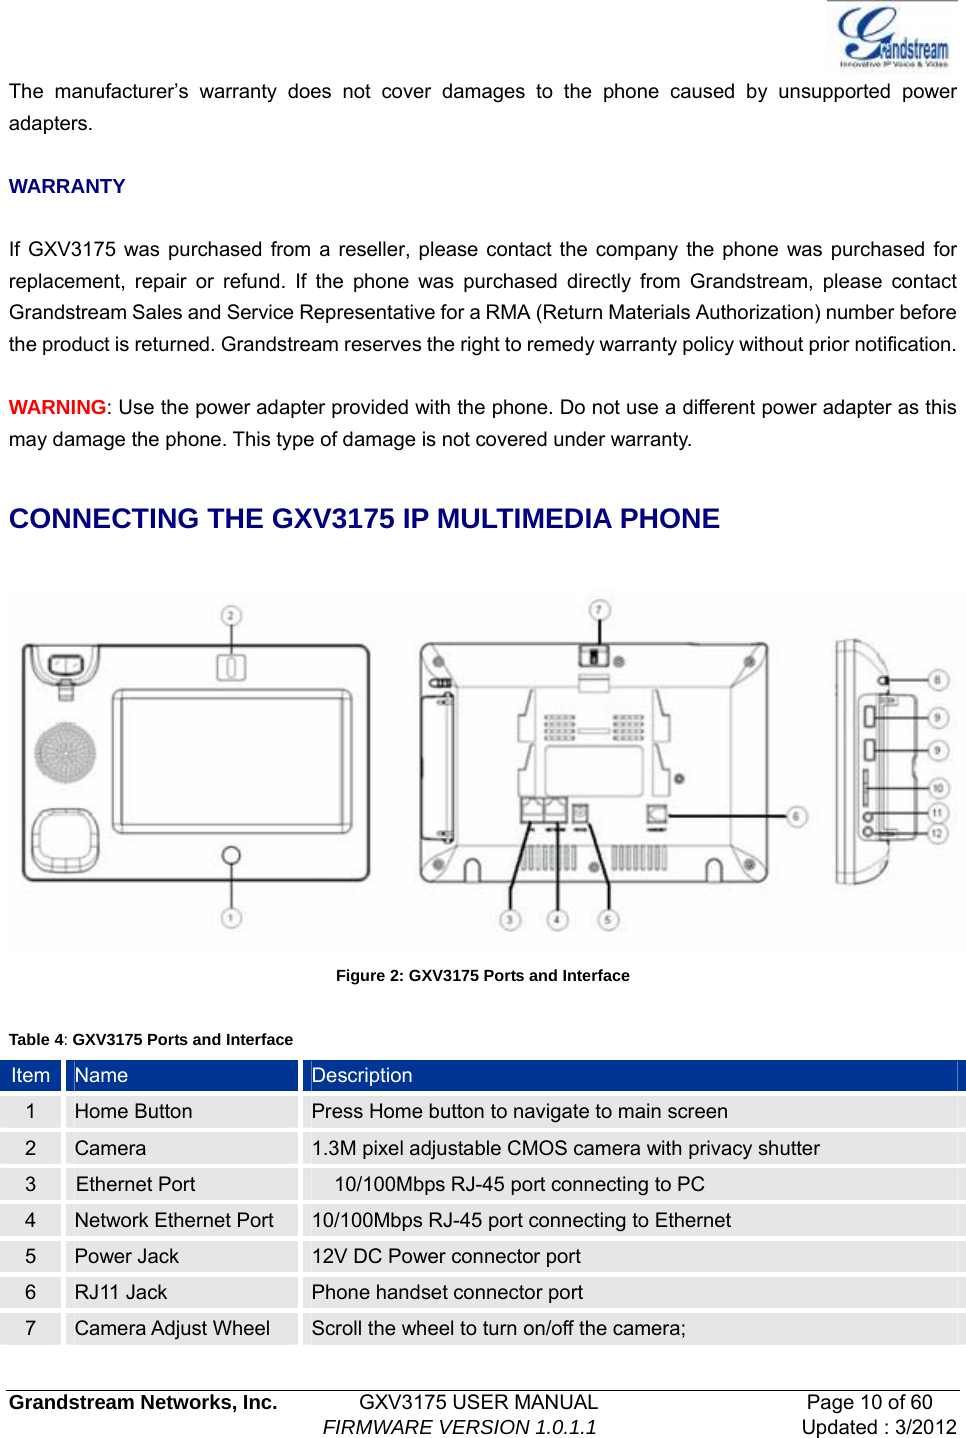   Grandstream Networks, Inc.        GXV3175 USER MANUAL                     Page 10 of 60                                FIRMWARE VERSION 1.0.1.1 Updated : 3/2012  The manufacturer’s warranty does not cover damages to the phone caused by unsupported power adapters.  WARRANTY  If GXV3175 was purchased from a reseller, please contact the company the phone was purchased for replacement, repair or refund. If the phone was purchased directly from Grandstream, please contact Grandstream Sales and Service Representative for a RMA (Return Materials Authorization) number before the product is returned. Grandstream reserves the right to remedy warranty policy without prior notification.  WARNING: Use the power adapter provided with the phone. Do not use a different power adapter as this may damage the phone. This type of damage is not covered under warranty.  CONNECTING THE GXV3175 IP MULTIMEDIA PHONE   Figure 2: GXV3175 Ports and Interface  Table 4: GXV3175 Ports and Interface Item  Name  Description 1  Home Button  Press Home button to navigate to main screen 2  Camera  1.3M pixel adjustable CMOS camera with privacy shutter 3          Ethernet Port 10/100Mbps RJ-45 port connecting to PC 4  Network Ethernet Port  10/100Mbps RJ-45 port connecting to Ethernet 5  Power Jack  12V DC Power connector port 6  RJ11 Jack  Phone handset connector port 7  Camera Adjust Wheel  Scroll the wheel to turn on/off the camera; 